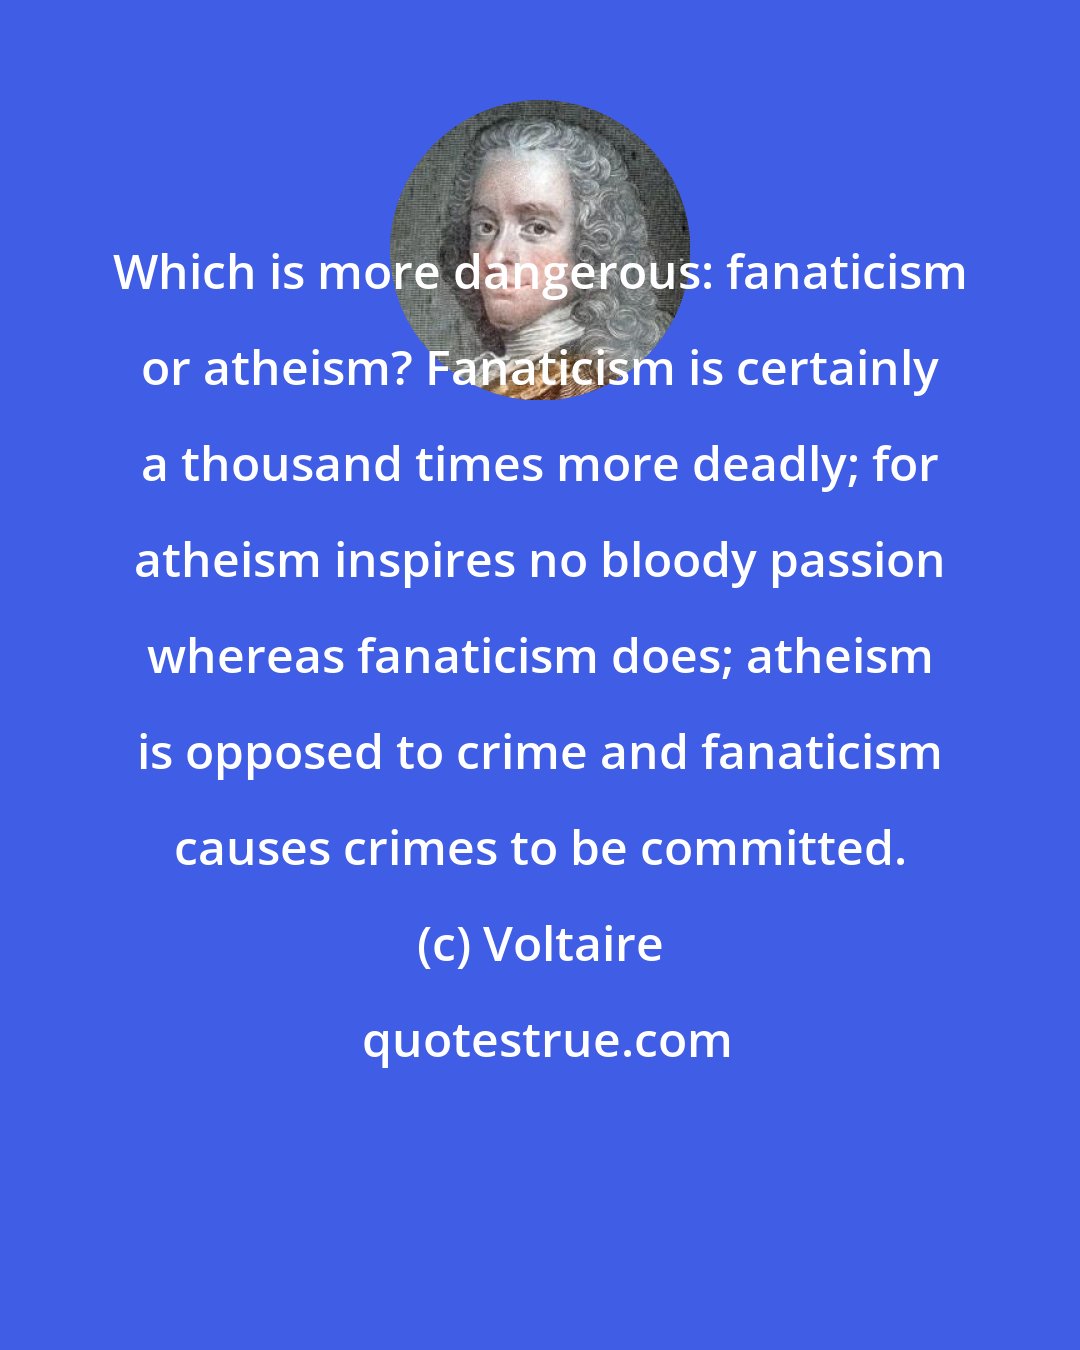 Voltaire: Which is more dangerous: fanaticism or atheism? Fanaticism is certainly a thousand times more deadly; for atheism inspires no bloody passion whereas fanaticism does; atheism is opposed to crime and fanaticism causes crimes to be committed.